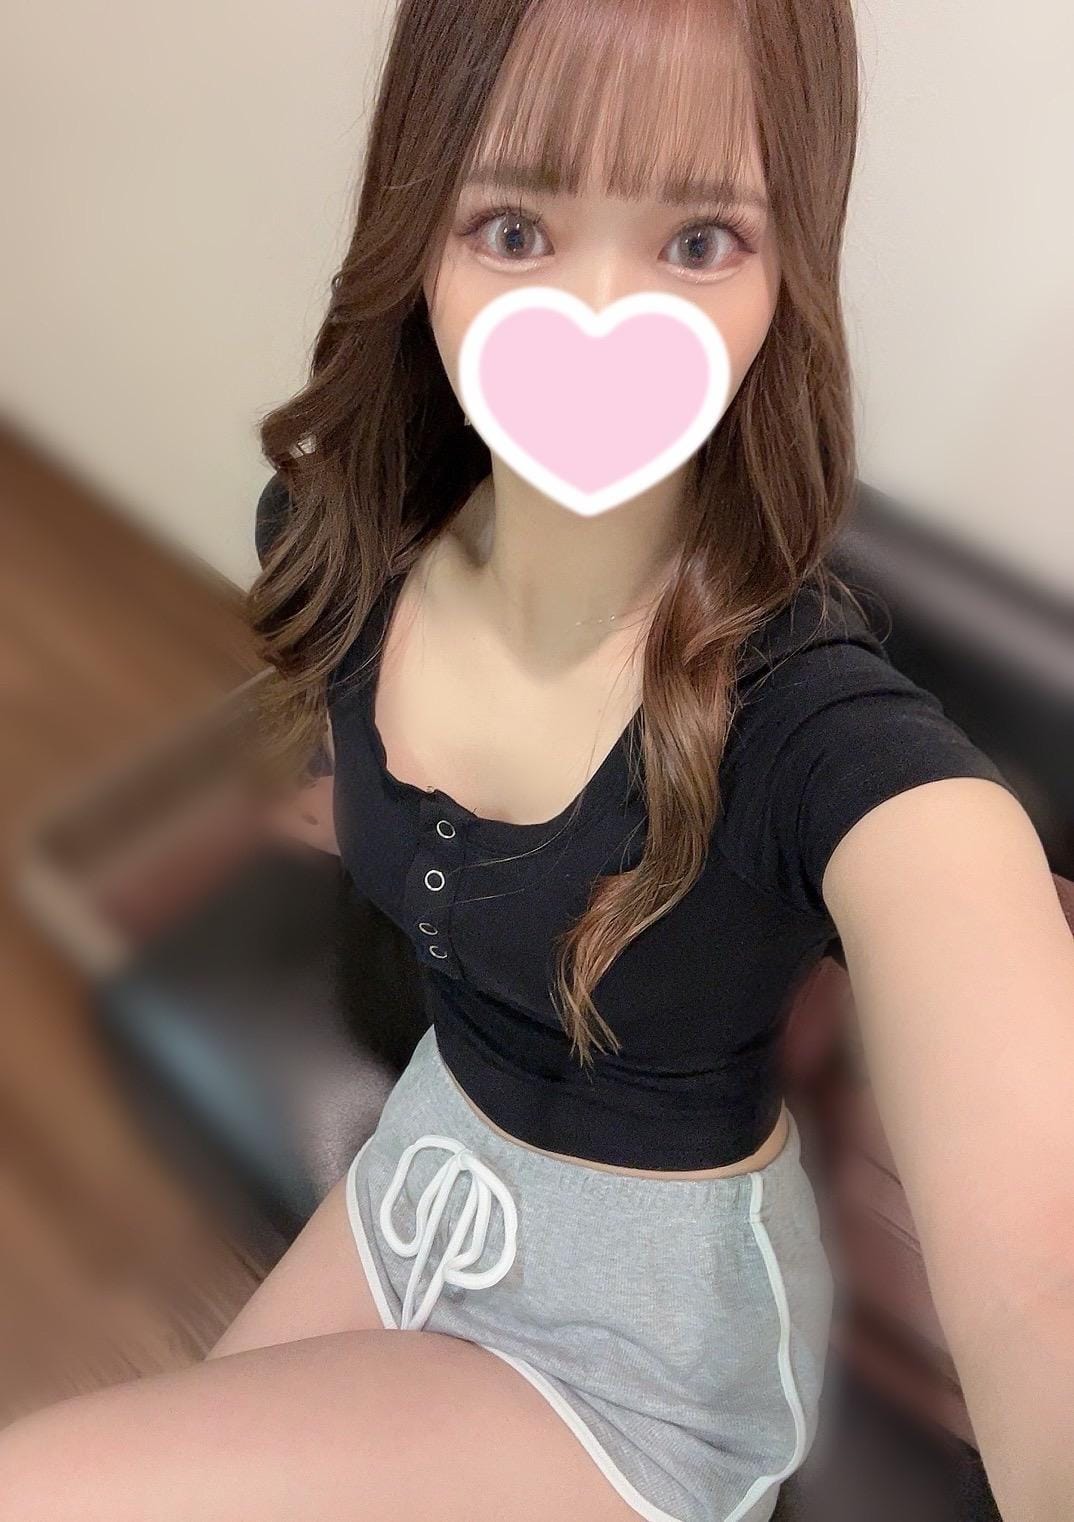 「Thank you ❤︎」02/21(水) 12:10 | 小花衣 あおいの写メ日記